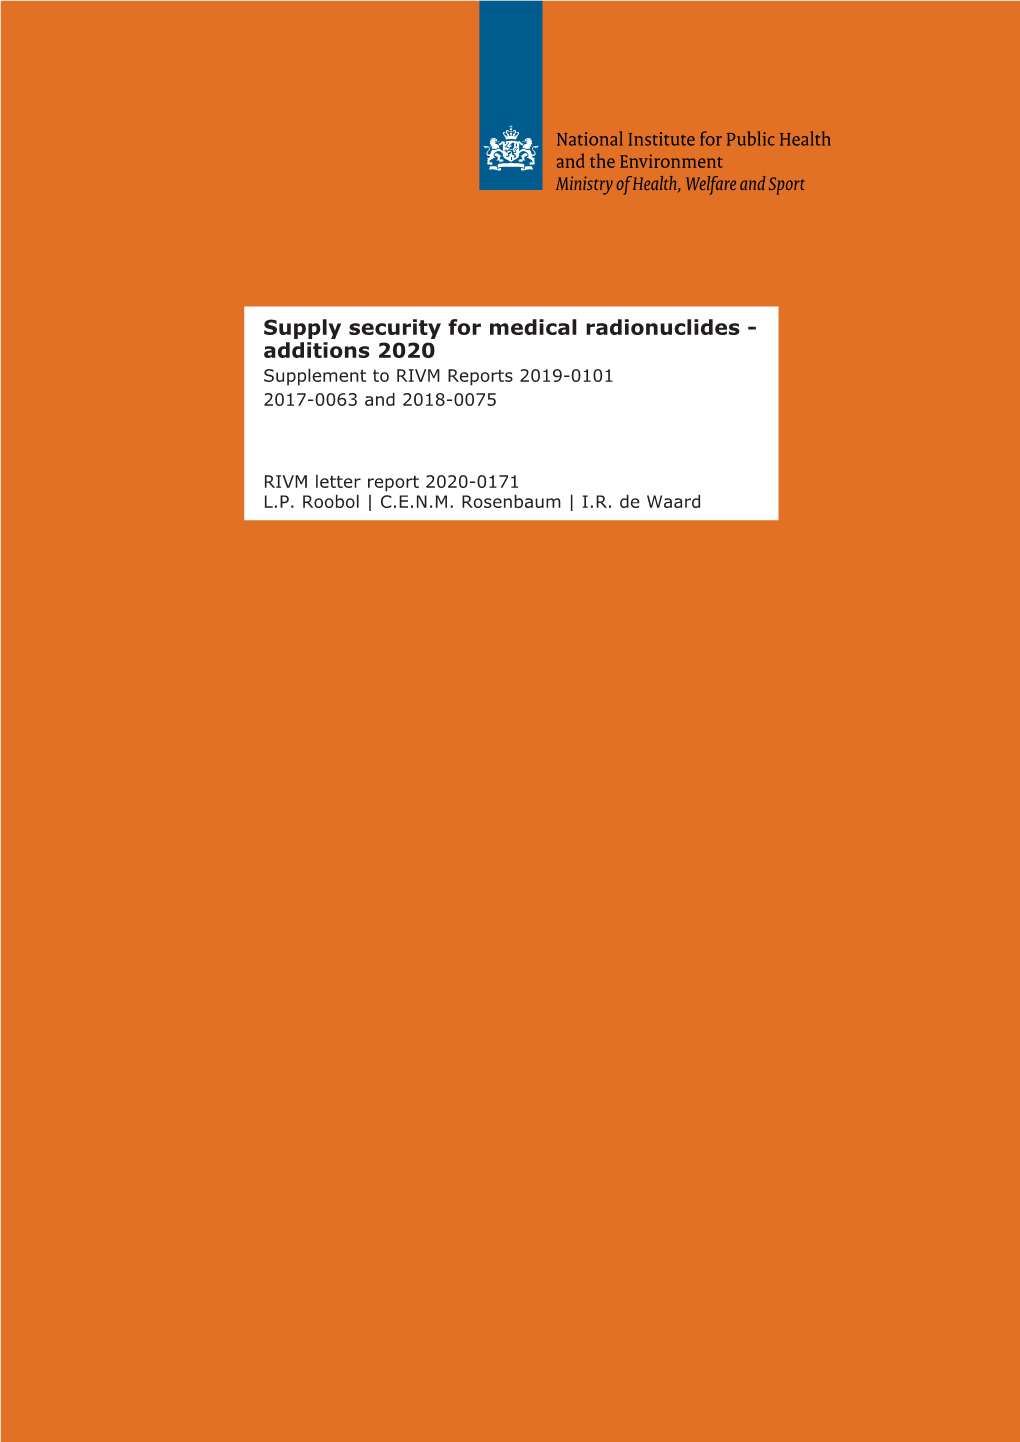 Supply Security for Medical Radionuclides - Additions 2020 Supplement to RIVM Reports 2019-0101 2017-0063 and 2018-0075